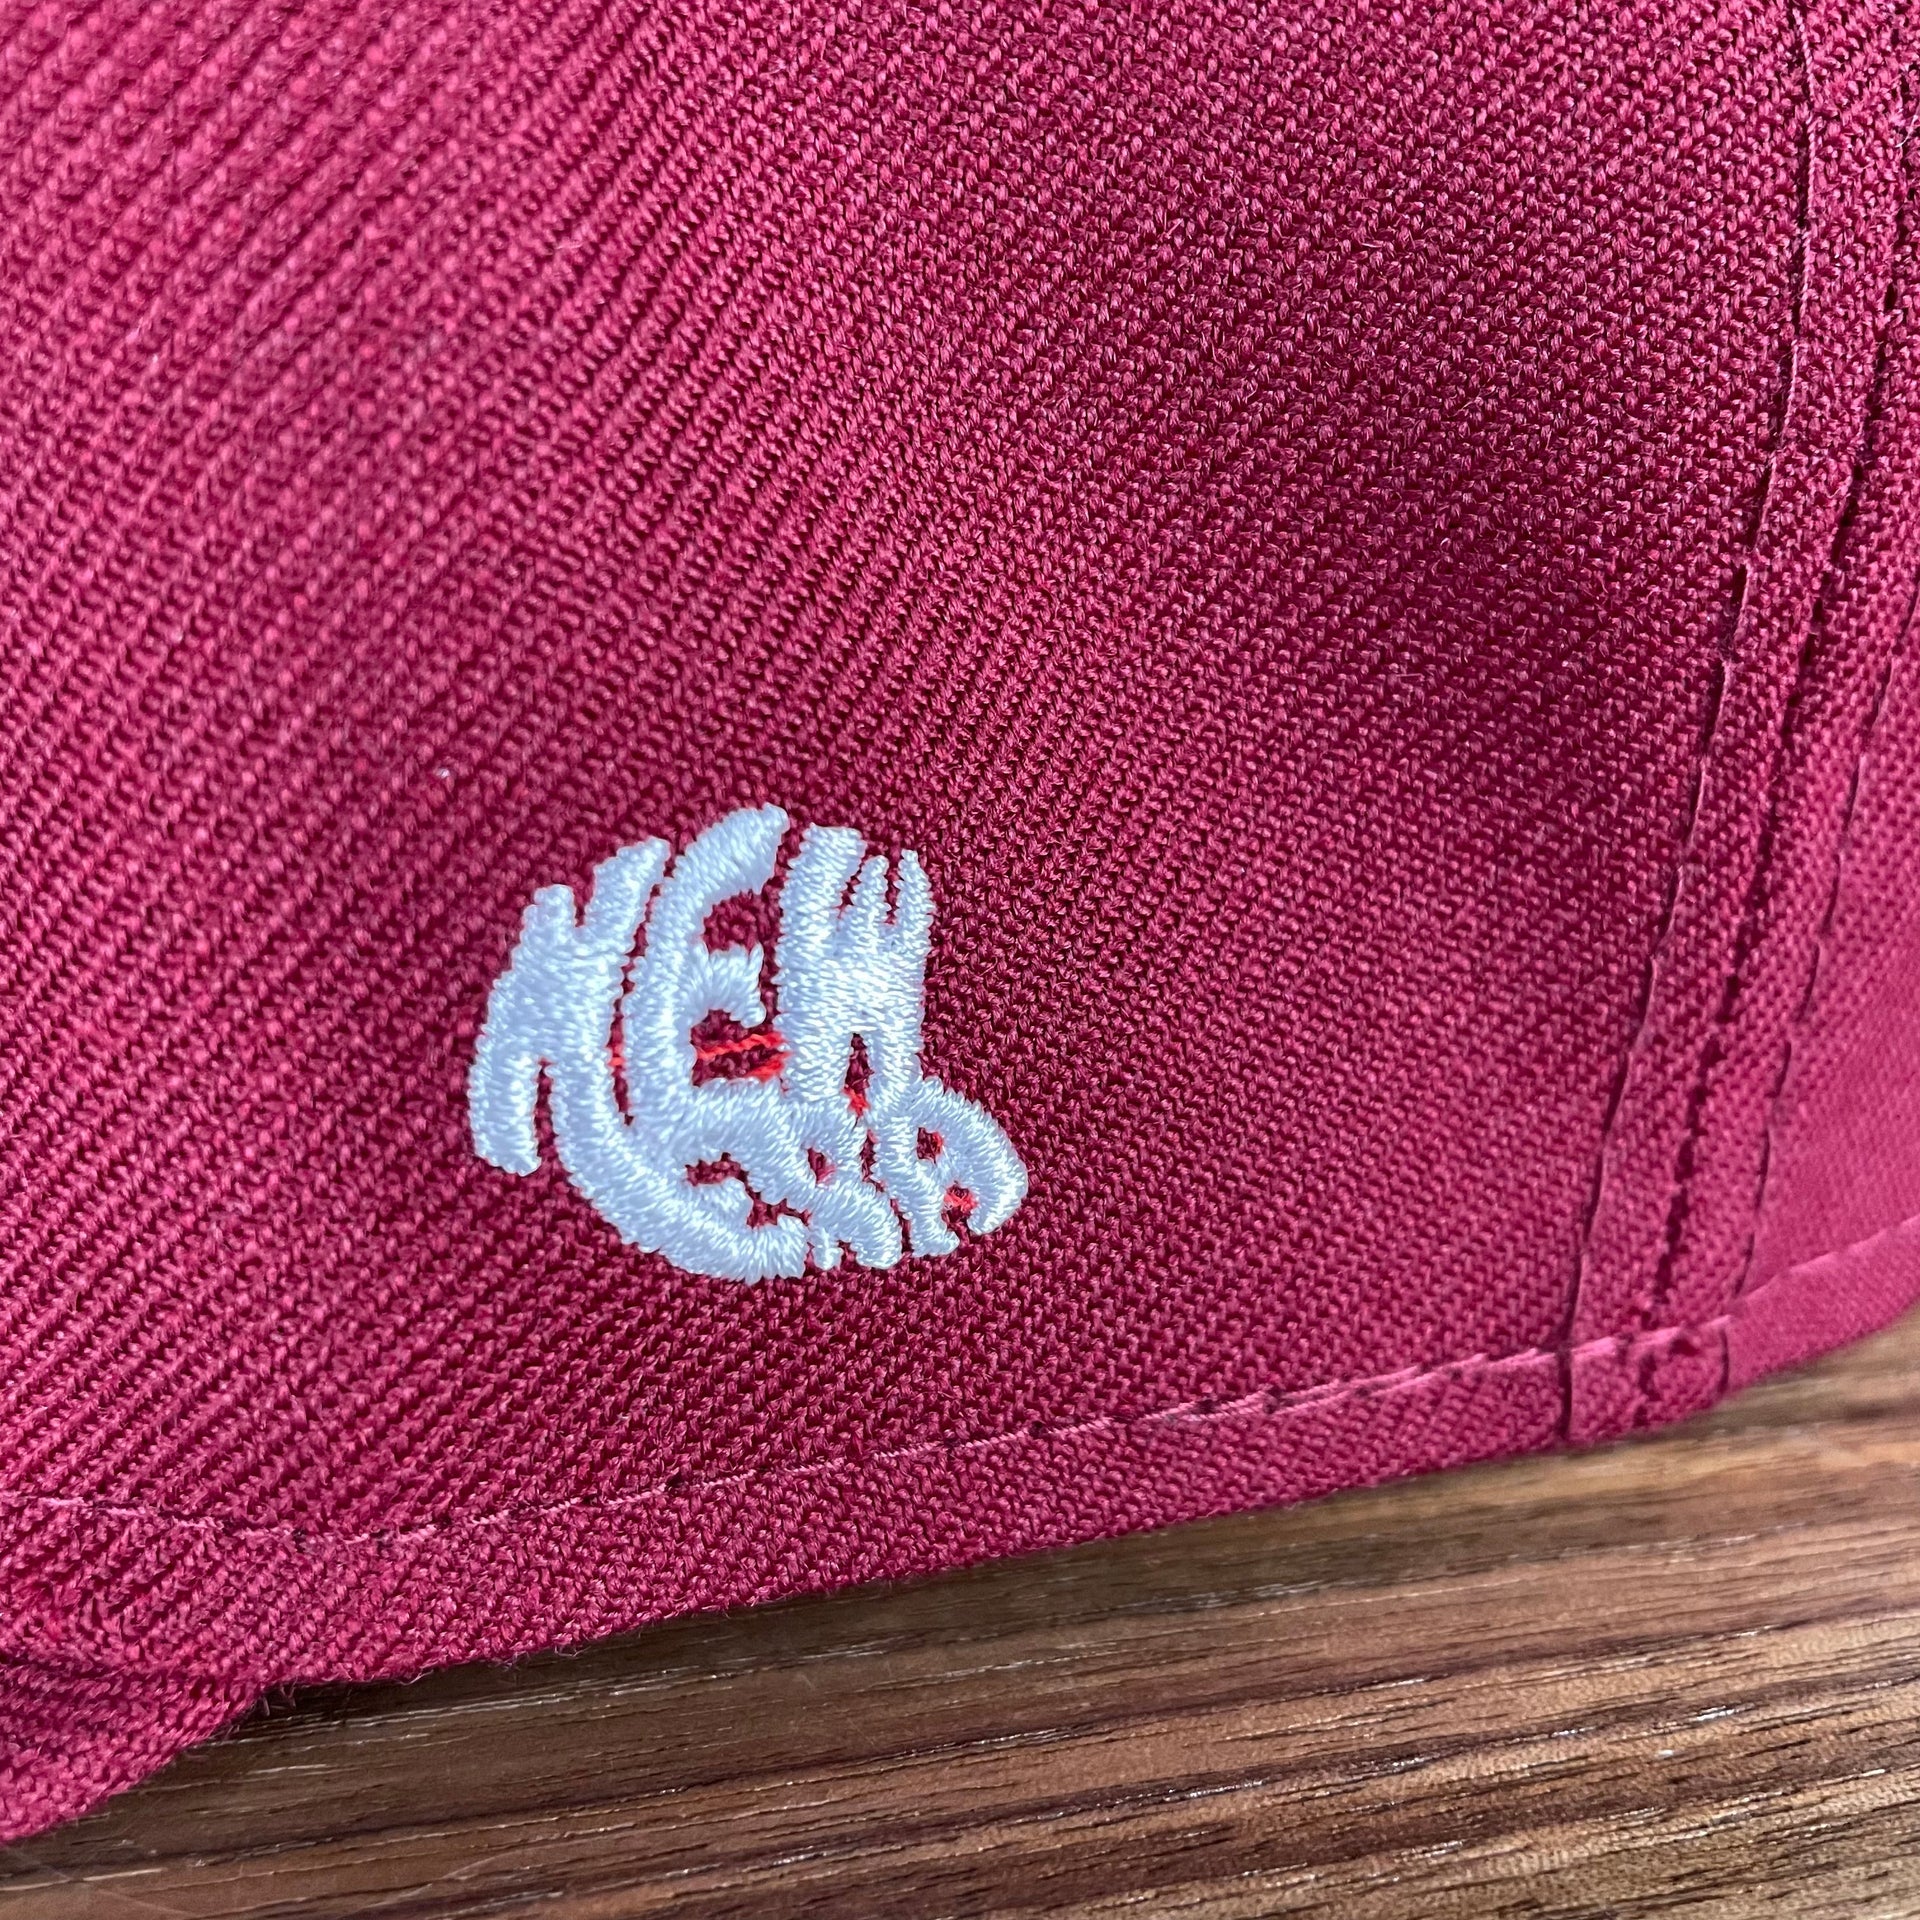 A close up of the 1960s New Era logo on the Philadelphia Phillies Cooperstown 5950 Day Side Patch Green Bottom 59Fifty Fitted Cap